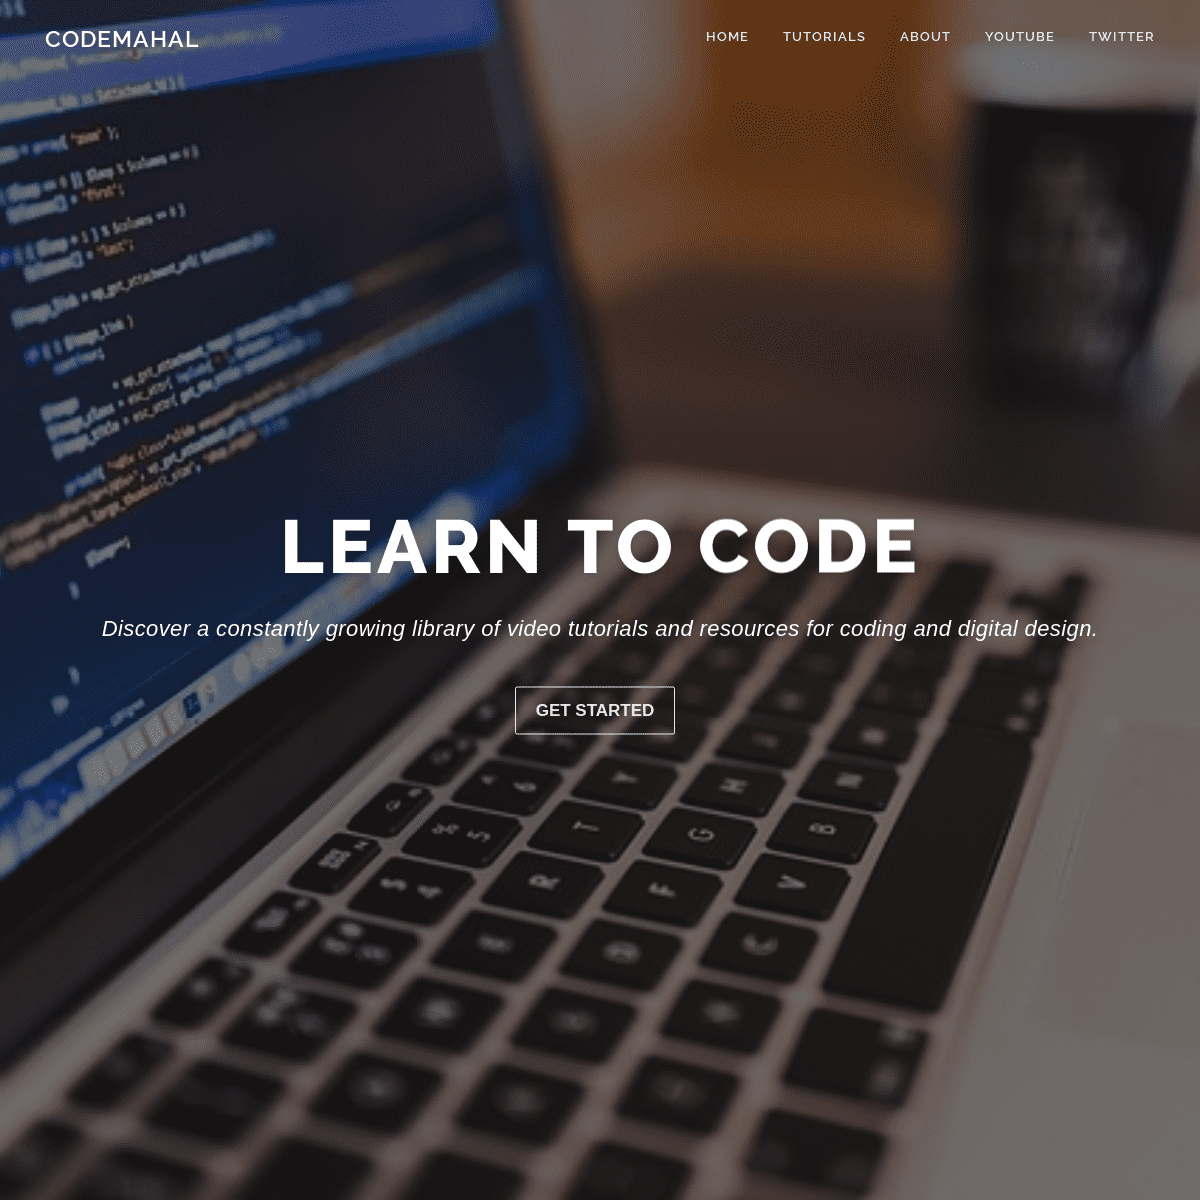 CodeMahal – Learn to code today!